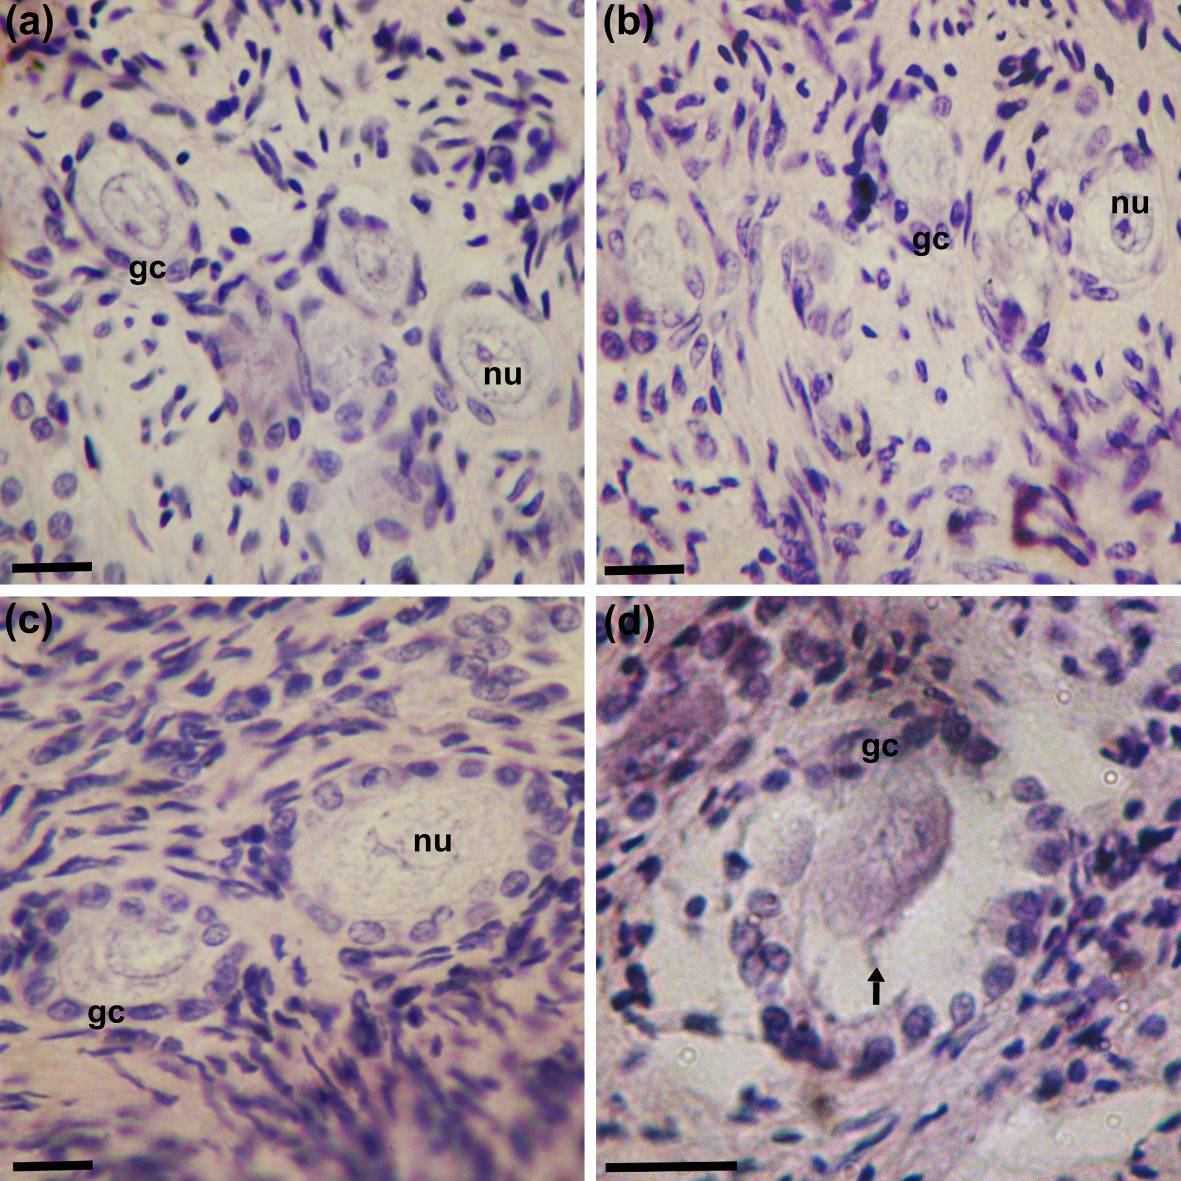 108 Fig. 1. Histological features of canine ovarian fragments before (a) and after freezingthawing with 1.5 M DMSO (b) or PROH (c, d).